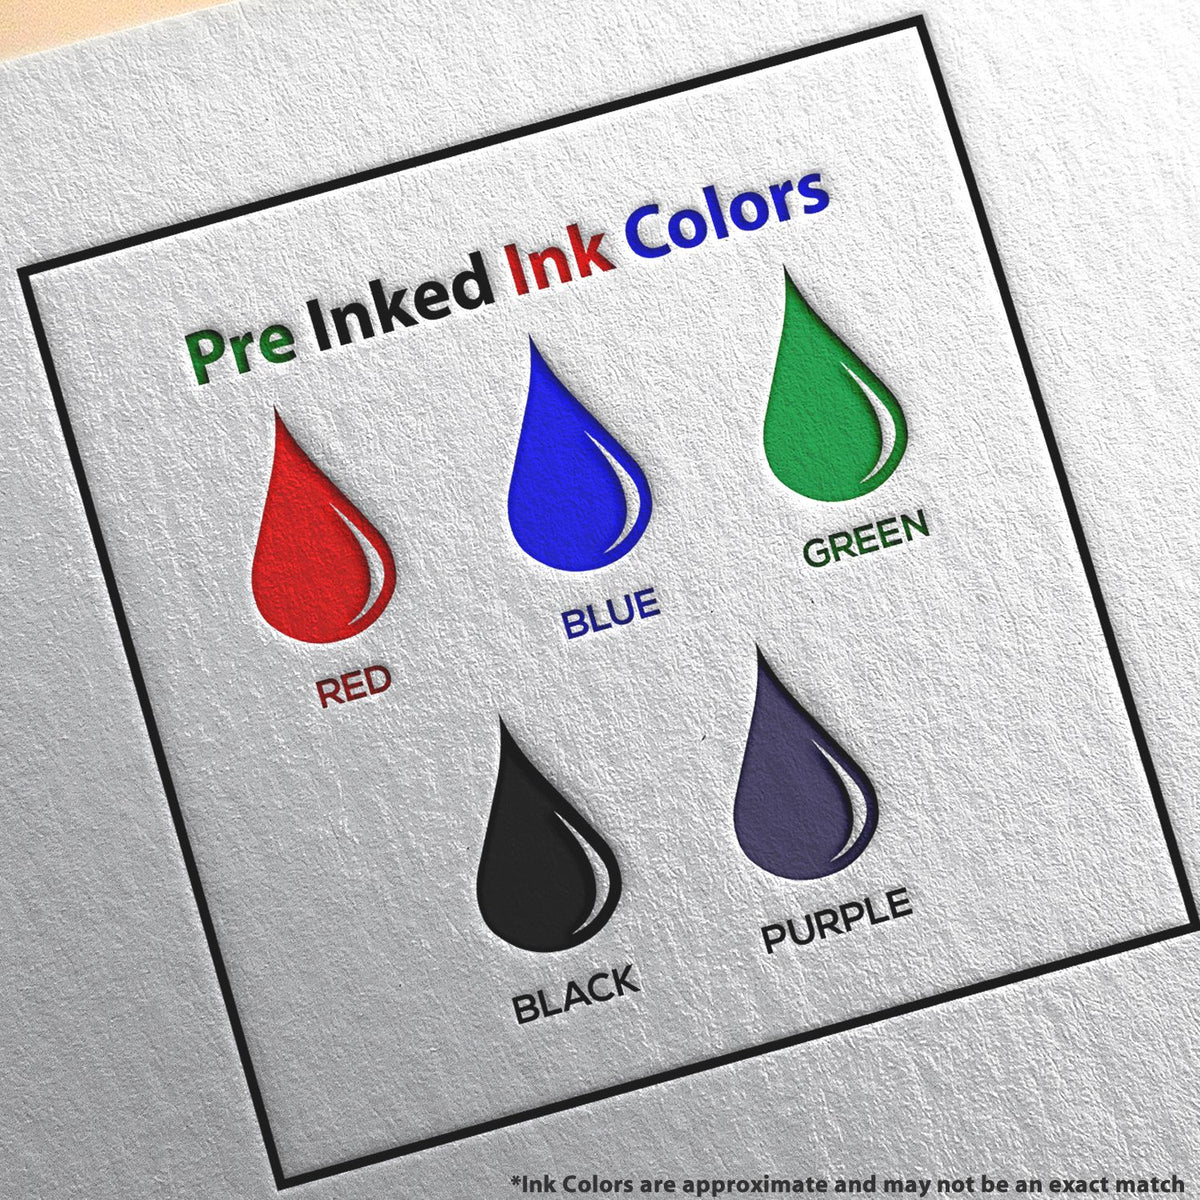 A picture showing the different ink colors or hues available for the Premium MaxLight Pre-Inked California Engineering Stamp product.